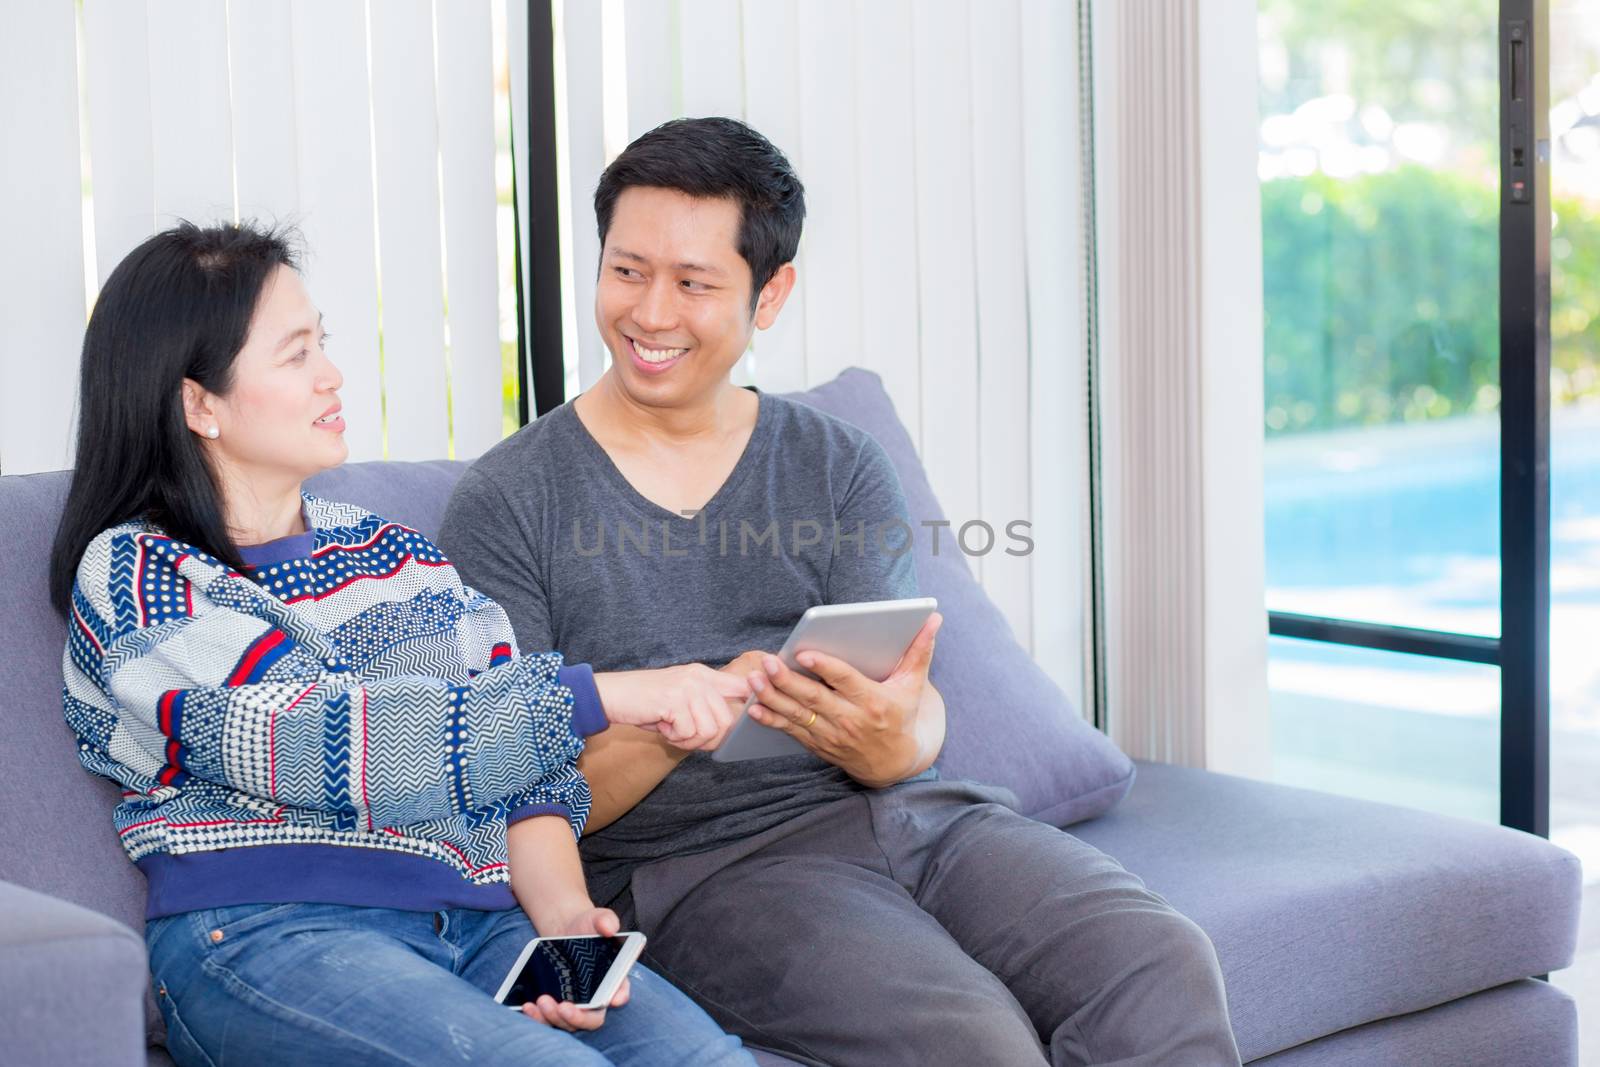 Two friends on line with multiple devices and talking sitting on a sofa in the living room in a house interior, communication concept.